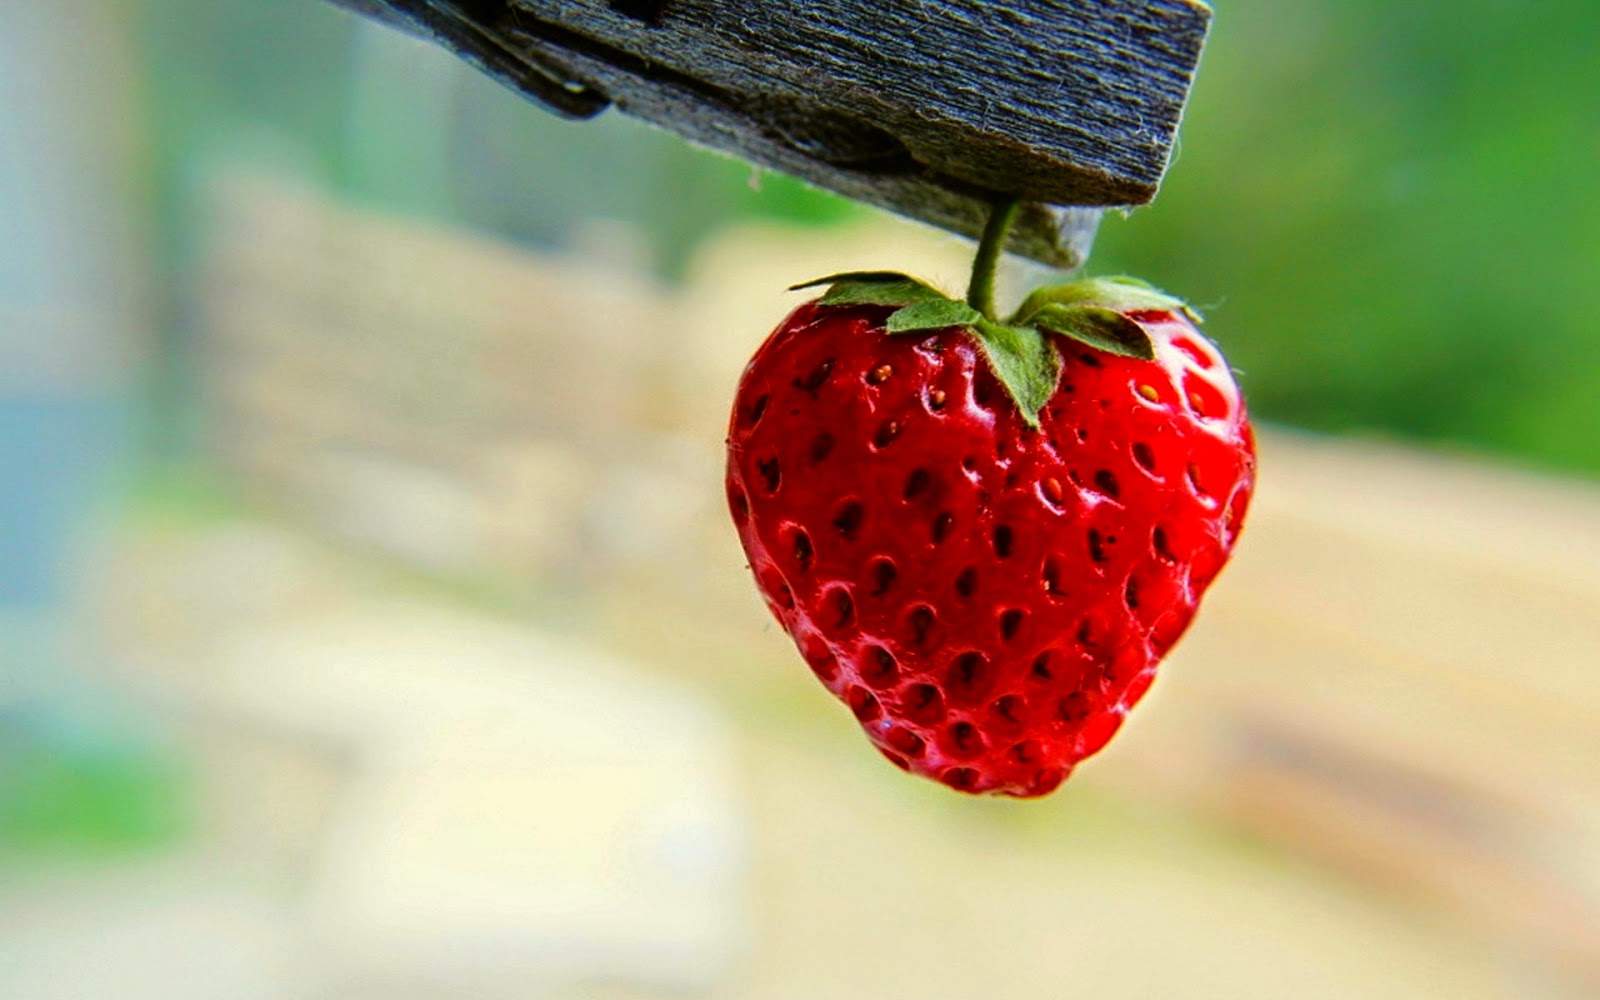 fruits pictures wallpapers,strawberry,natural foods,strawberries,berry,fruit